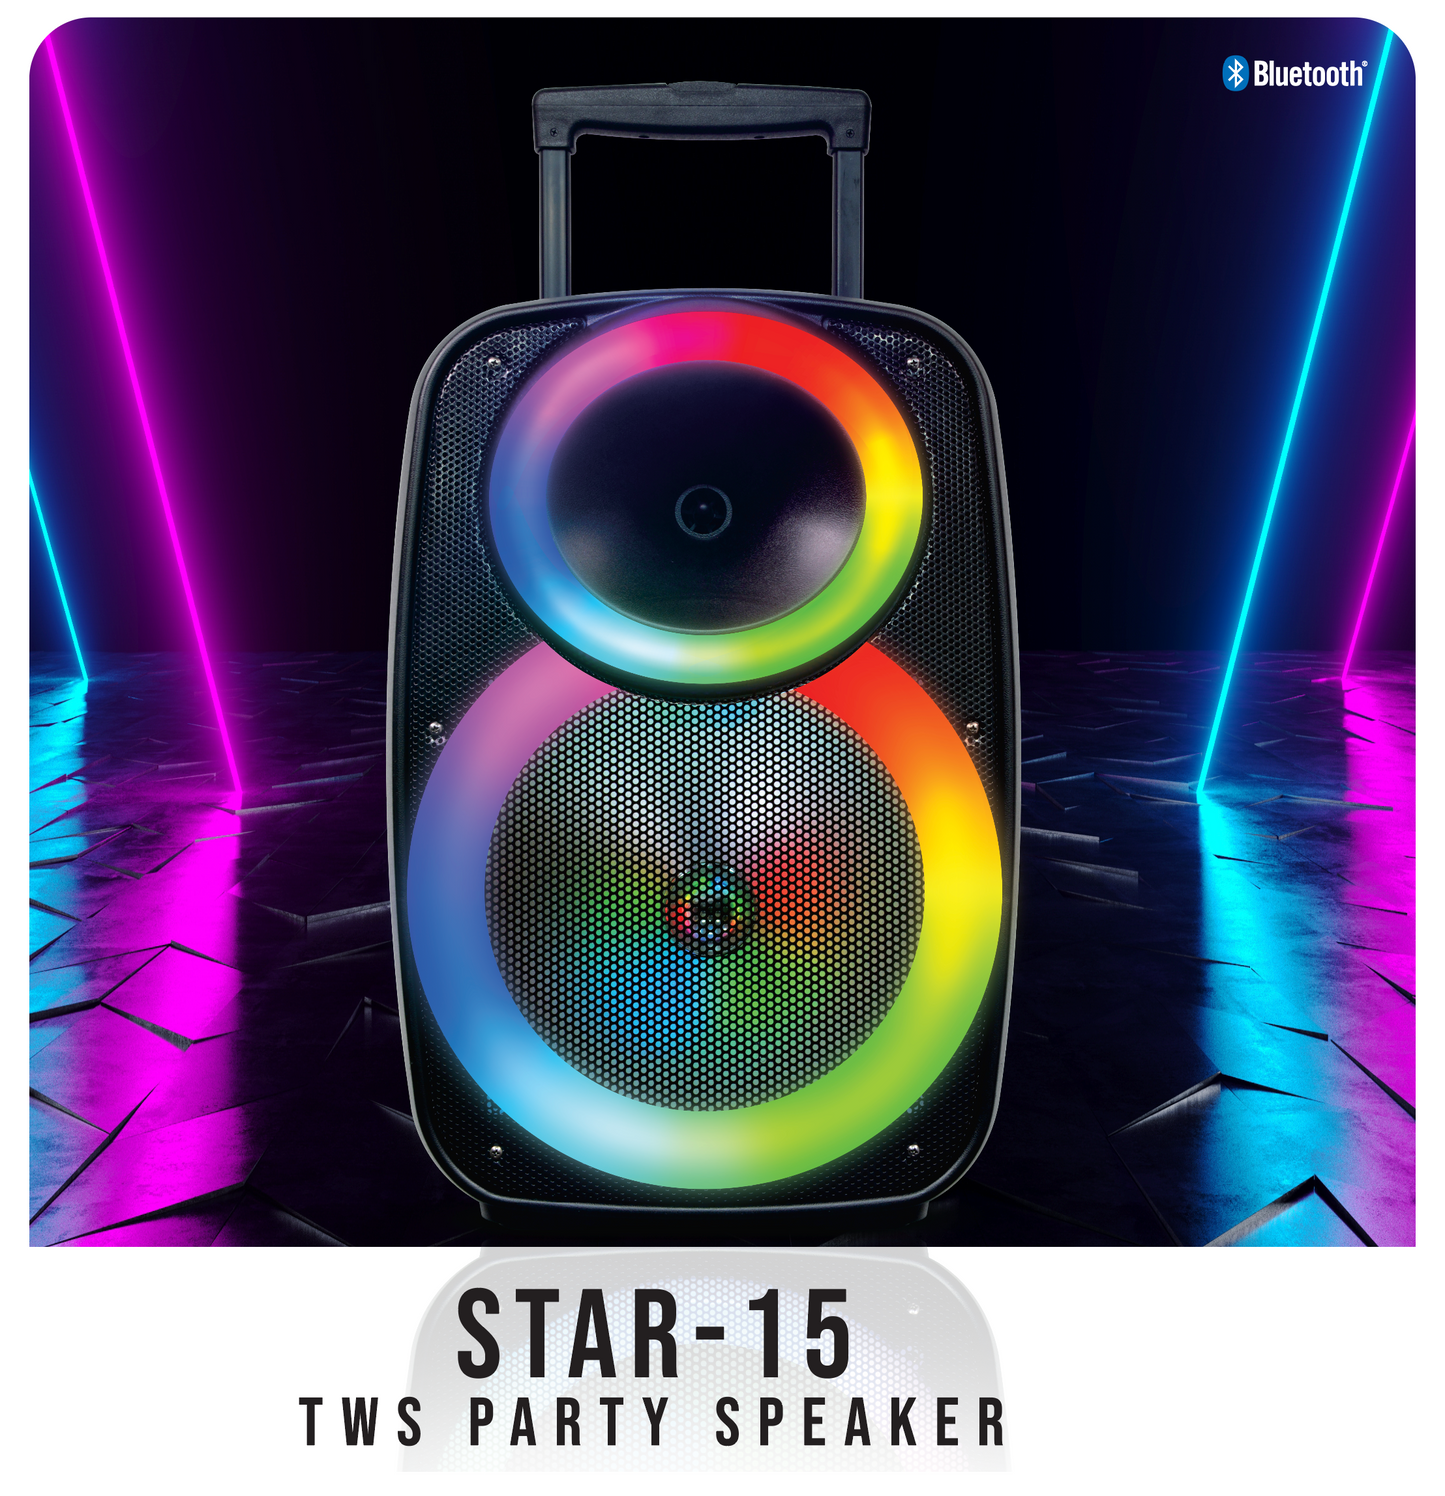 TOPTECH Star-15, 15 Inch Portable Bluetooth Party Speaker,Up to 10 Meters (33ft) Bluetooth Distance,Crystal Clear Sound, Wireless TWS Sound System with Flashing Flame Lights,Rechargeable Long Battery Life for Party Outdoor Camping